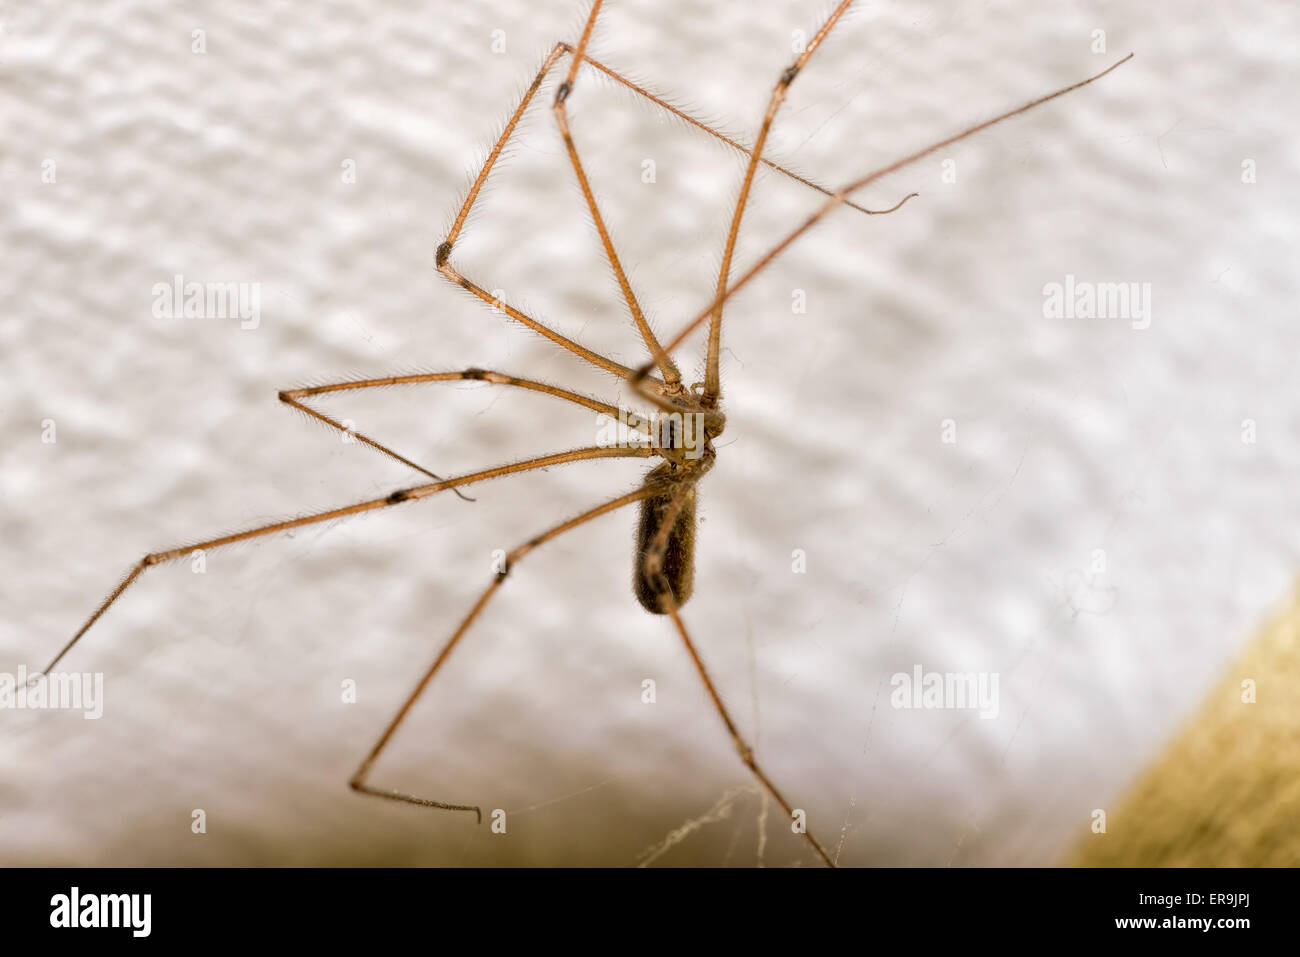 A house spider, pholcus phalangioides, on a wall Stock Photo